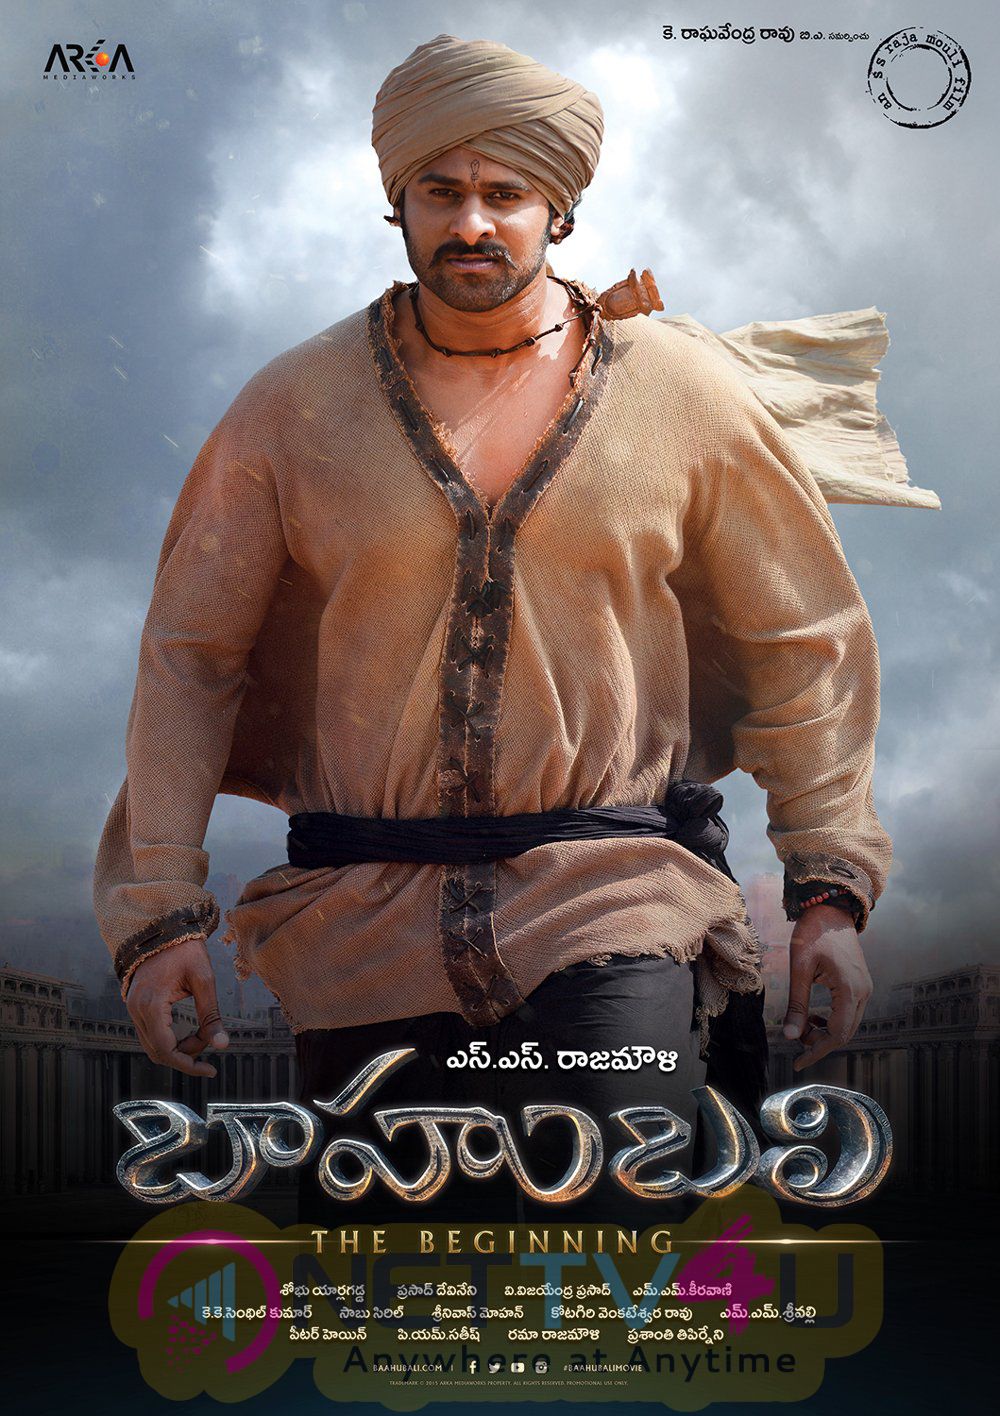 wallpapers and posters for baahubali telugu movie 30 days 16